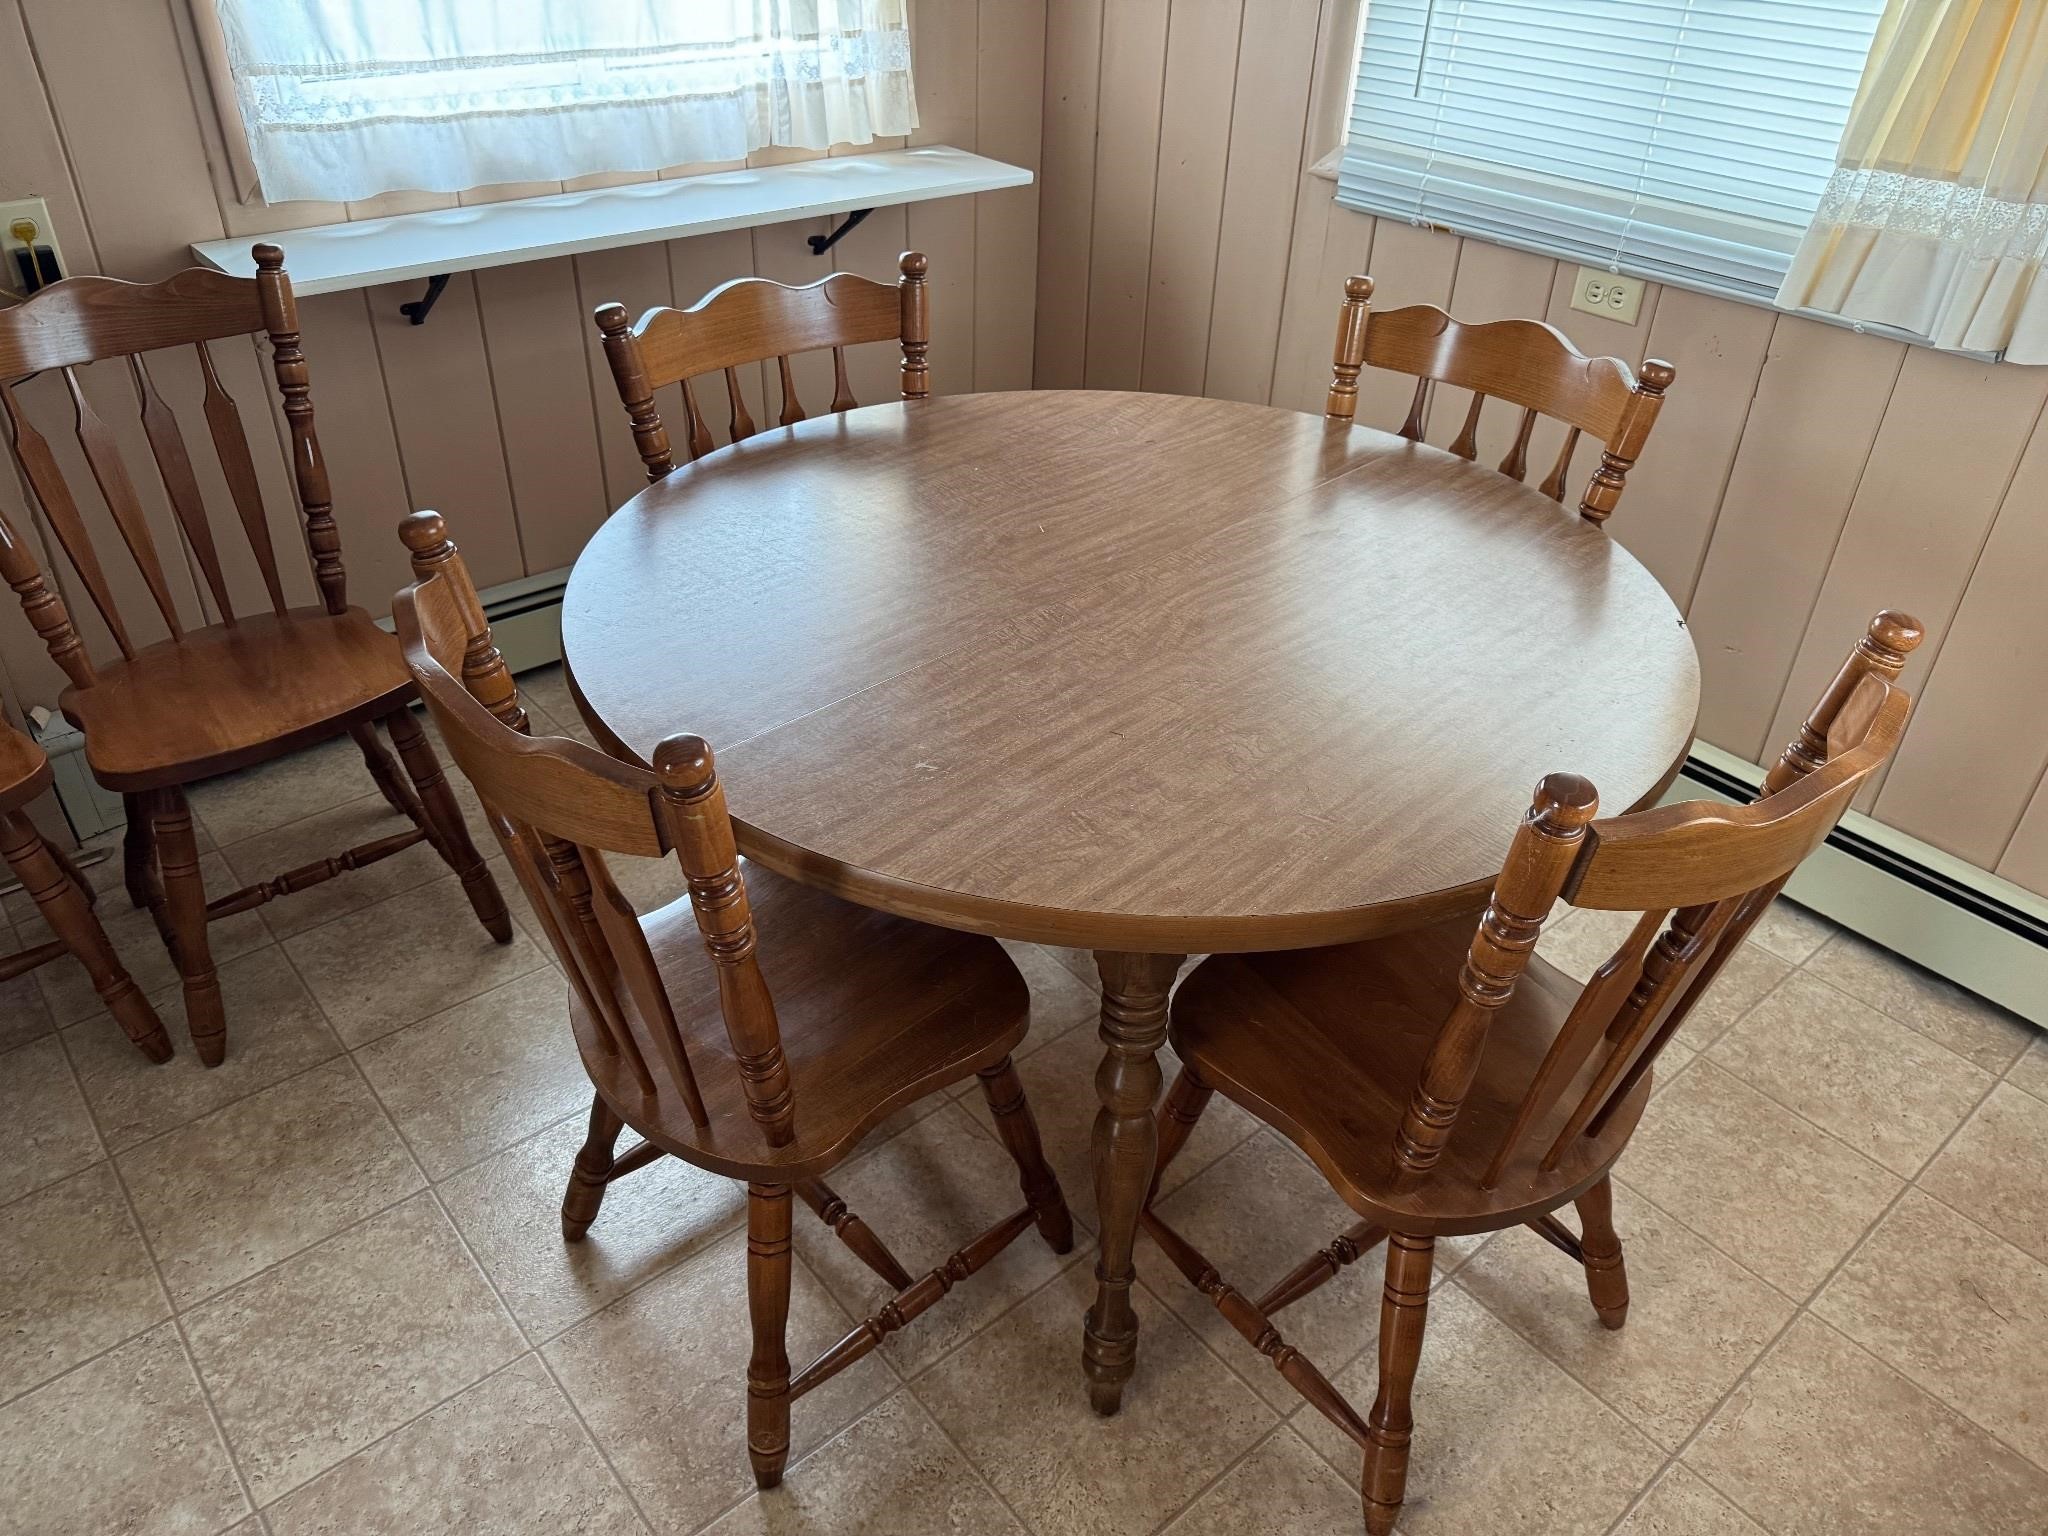 Dining Room Table, 6 Chairs, 2 leaves